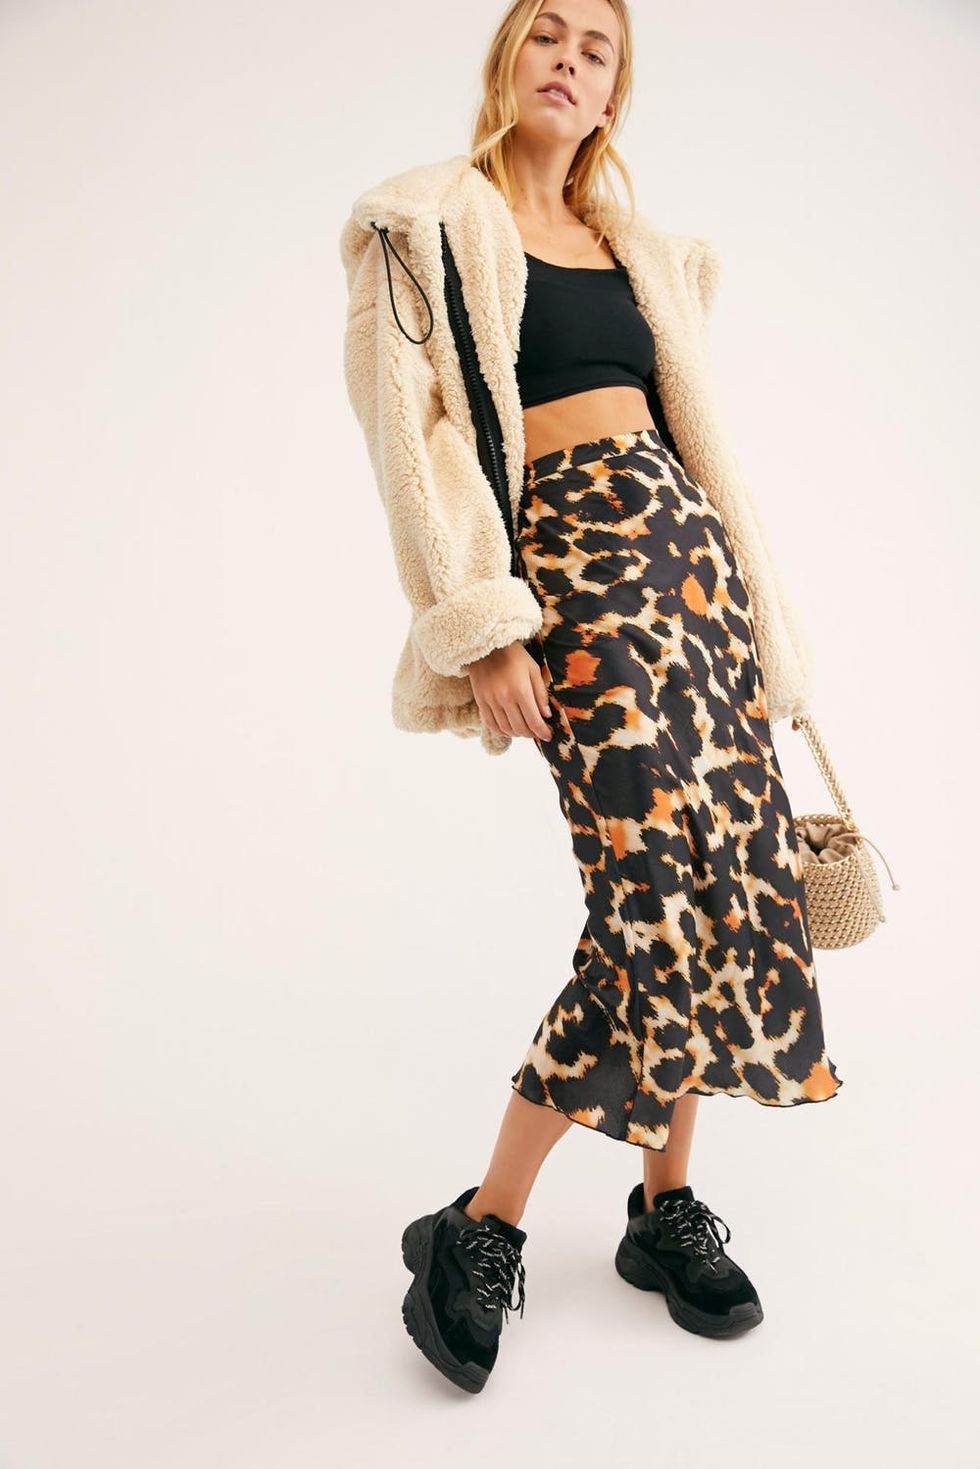 8 Simple Ways to Style Spring’s Leopard Print Midi Skirt Trend - Brit + Co